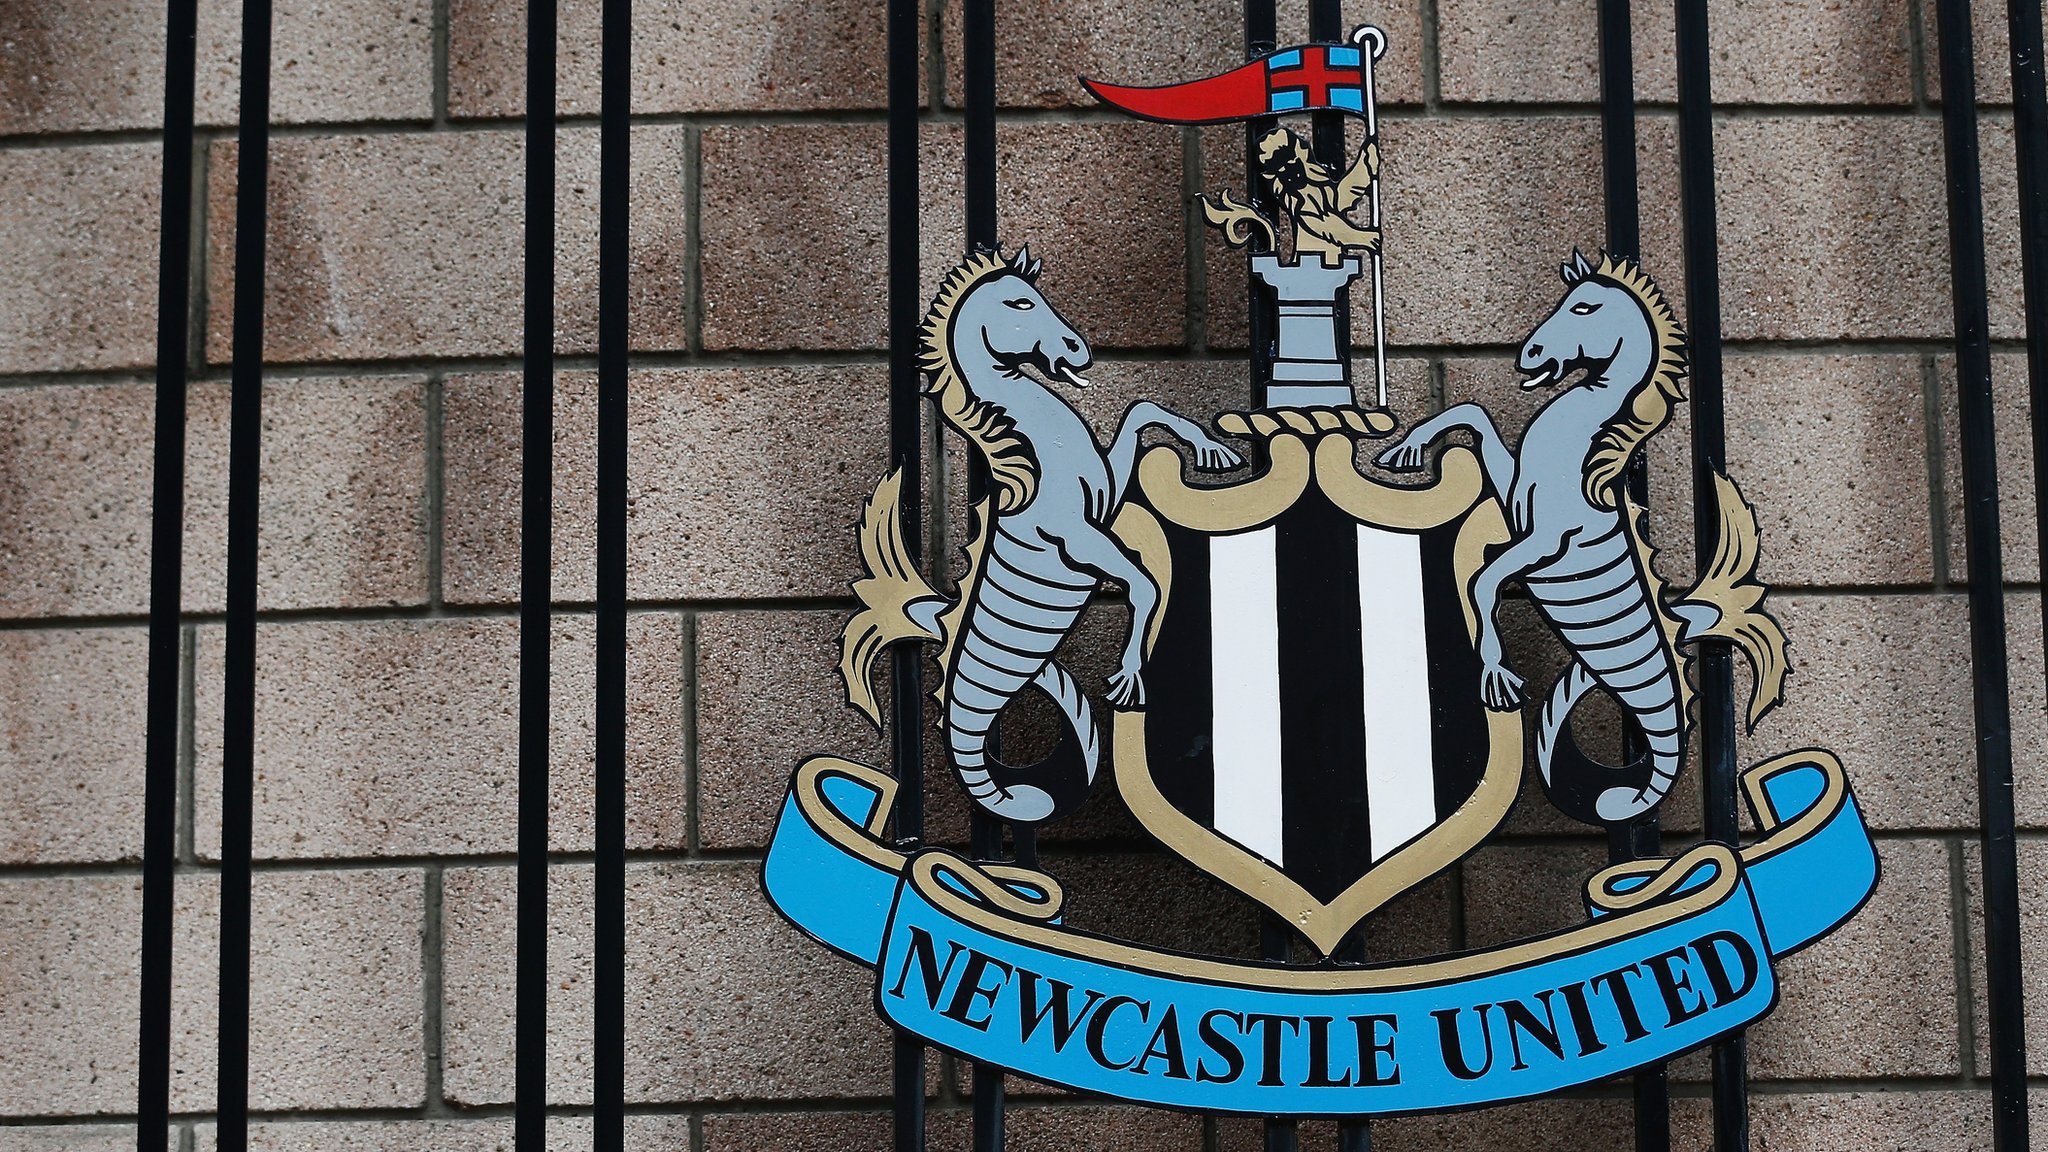 Newcastle United: Sheikh Khaled claims to have provided proof of funds to buy club